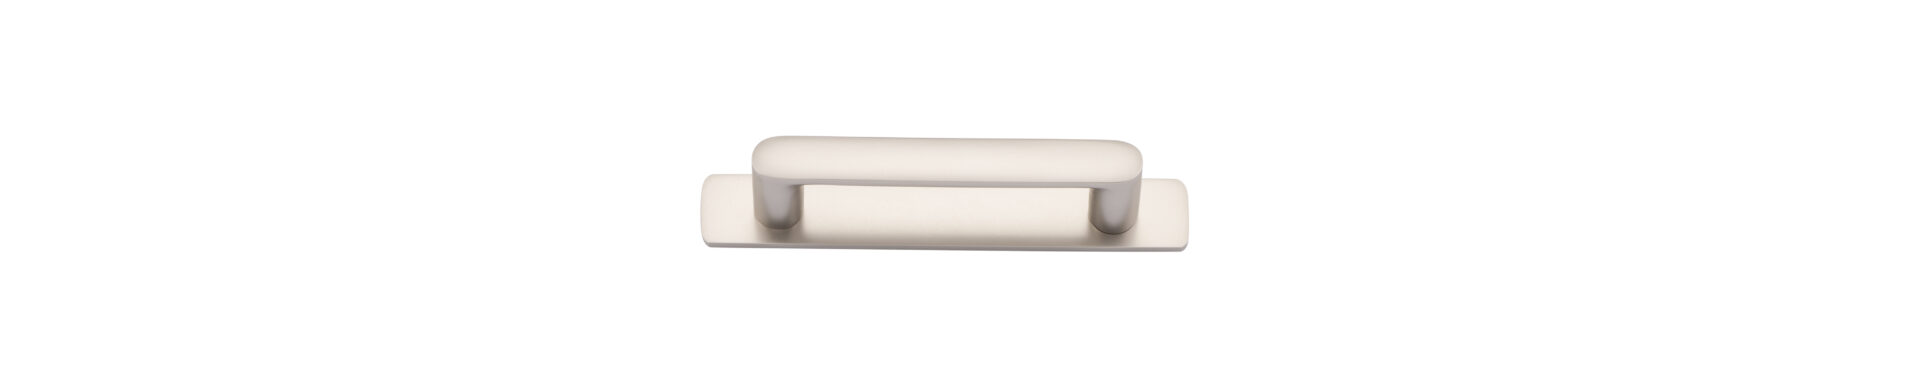 20949B - Osaka Cabinet Pull with Backplate - CTC96mm - Satin Nickel